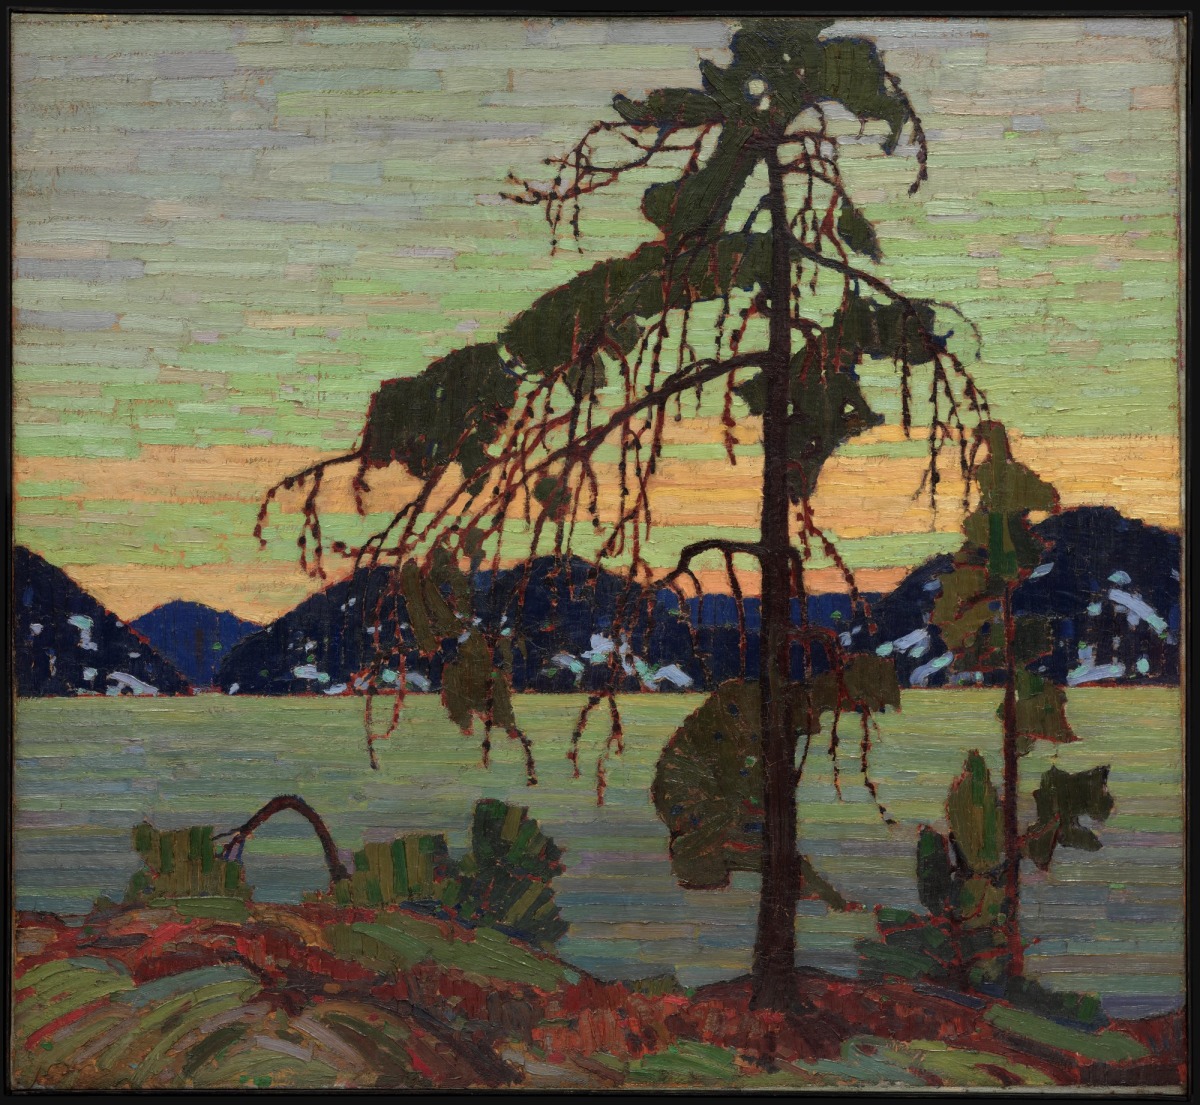 The Jack Pine by Tom Thomson